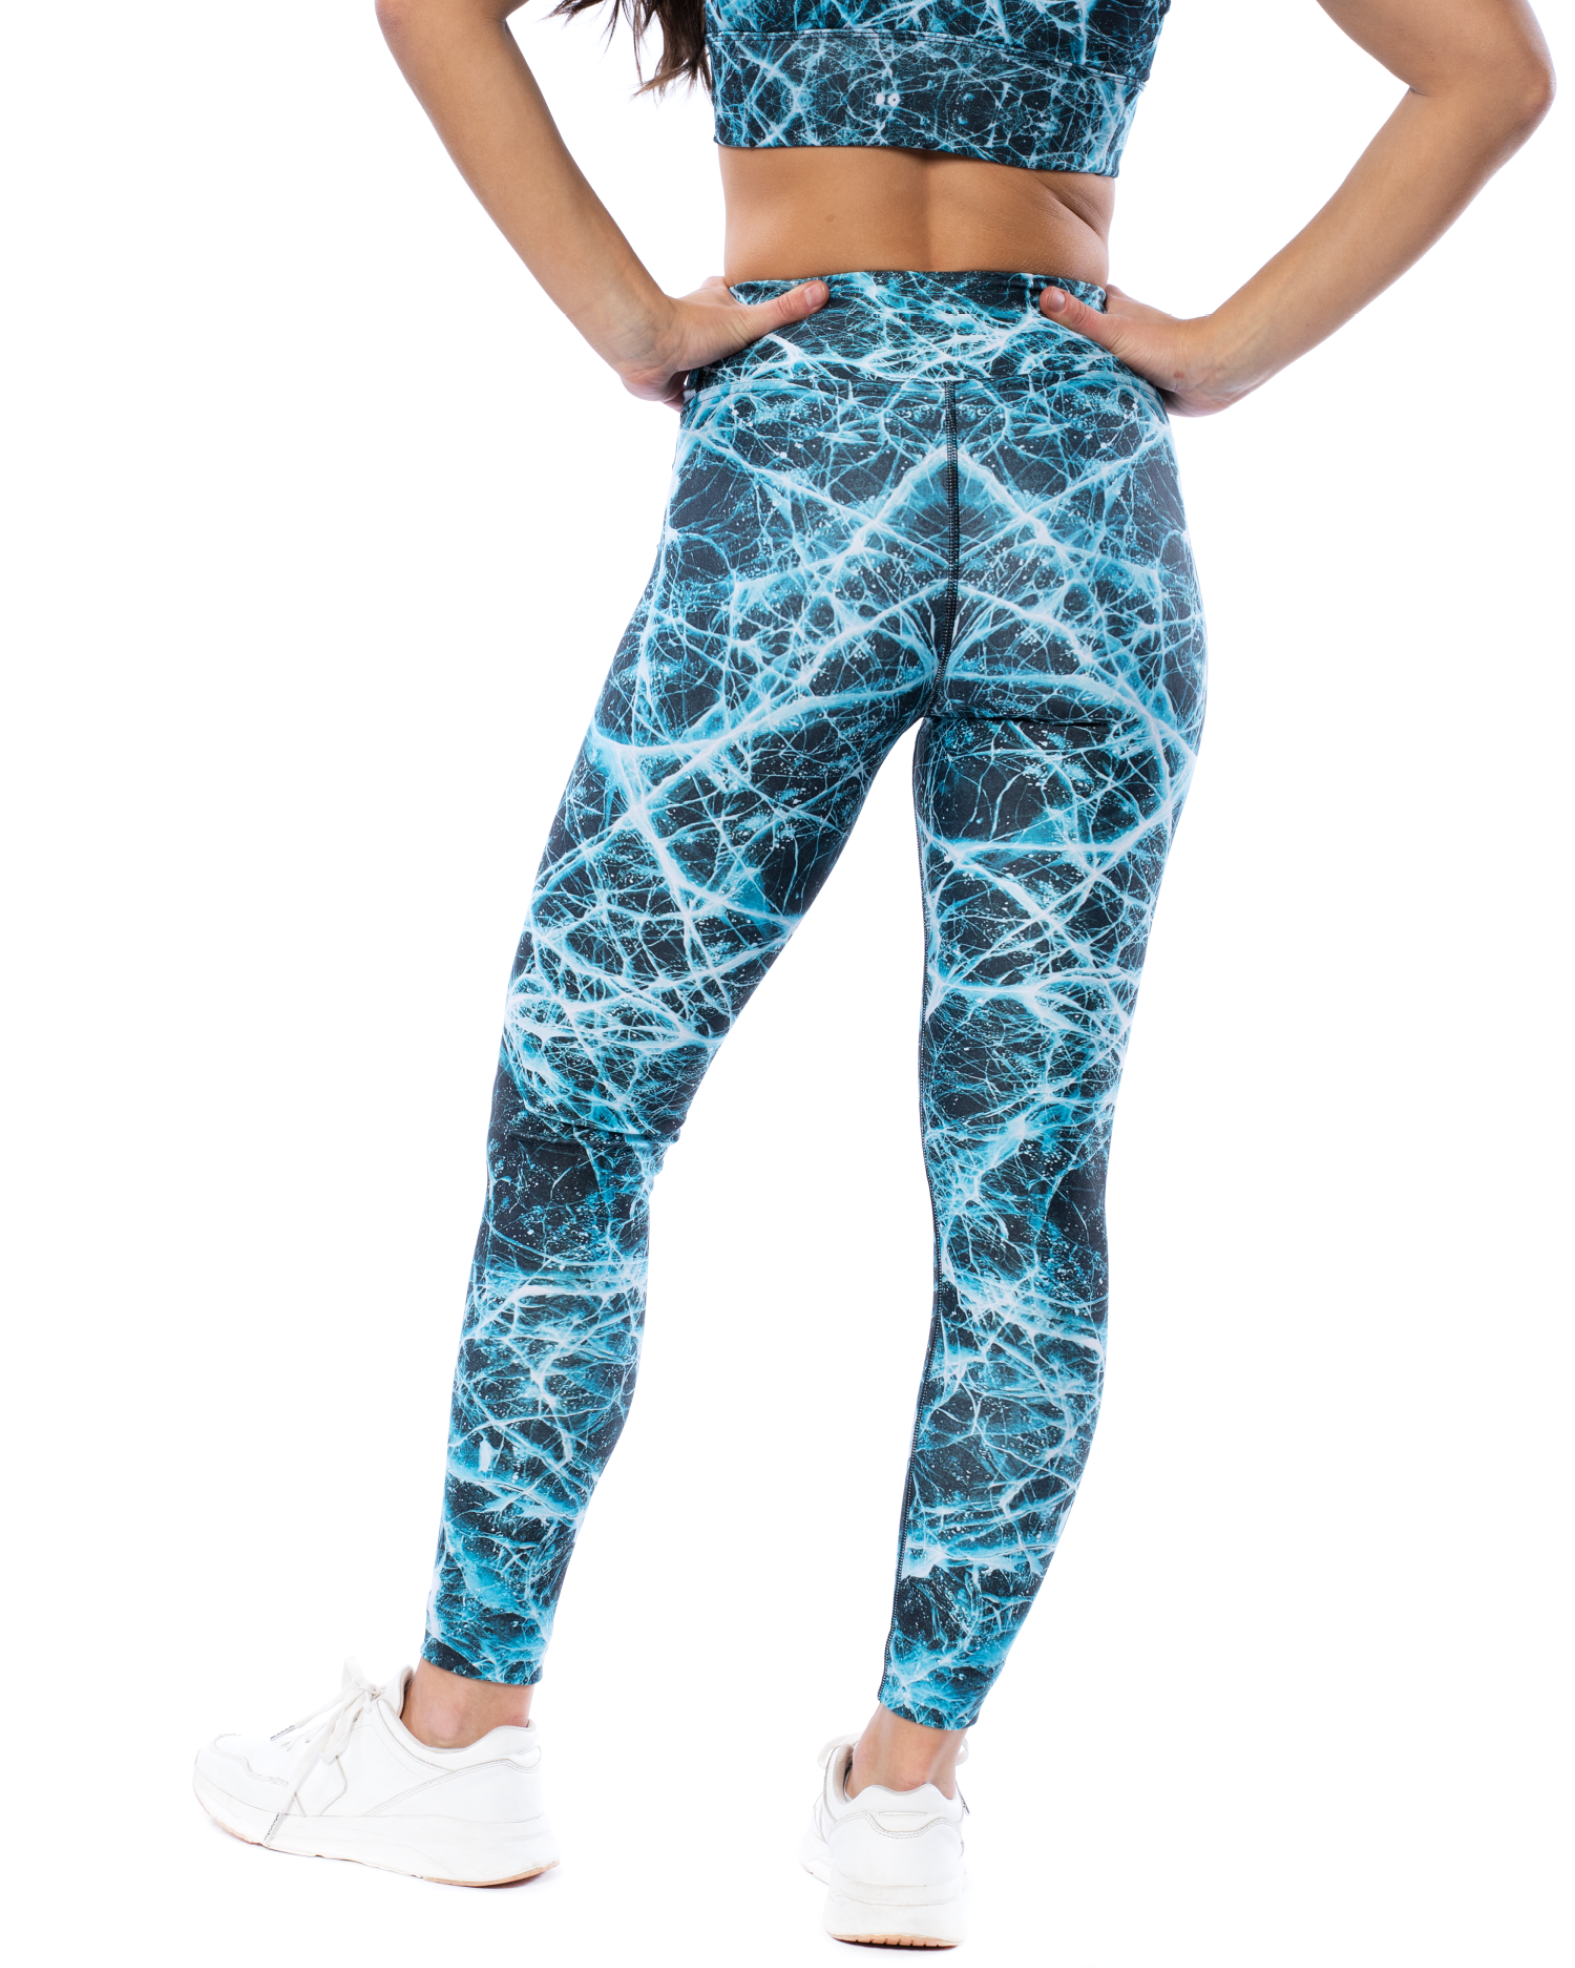 Buy Snowflakes Blue Yoga Leggings Women Christmas Workout Pants Cosplay  Matching Group Costume Capris Activewear Outfit Running Party Online in  India - Etsy